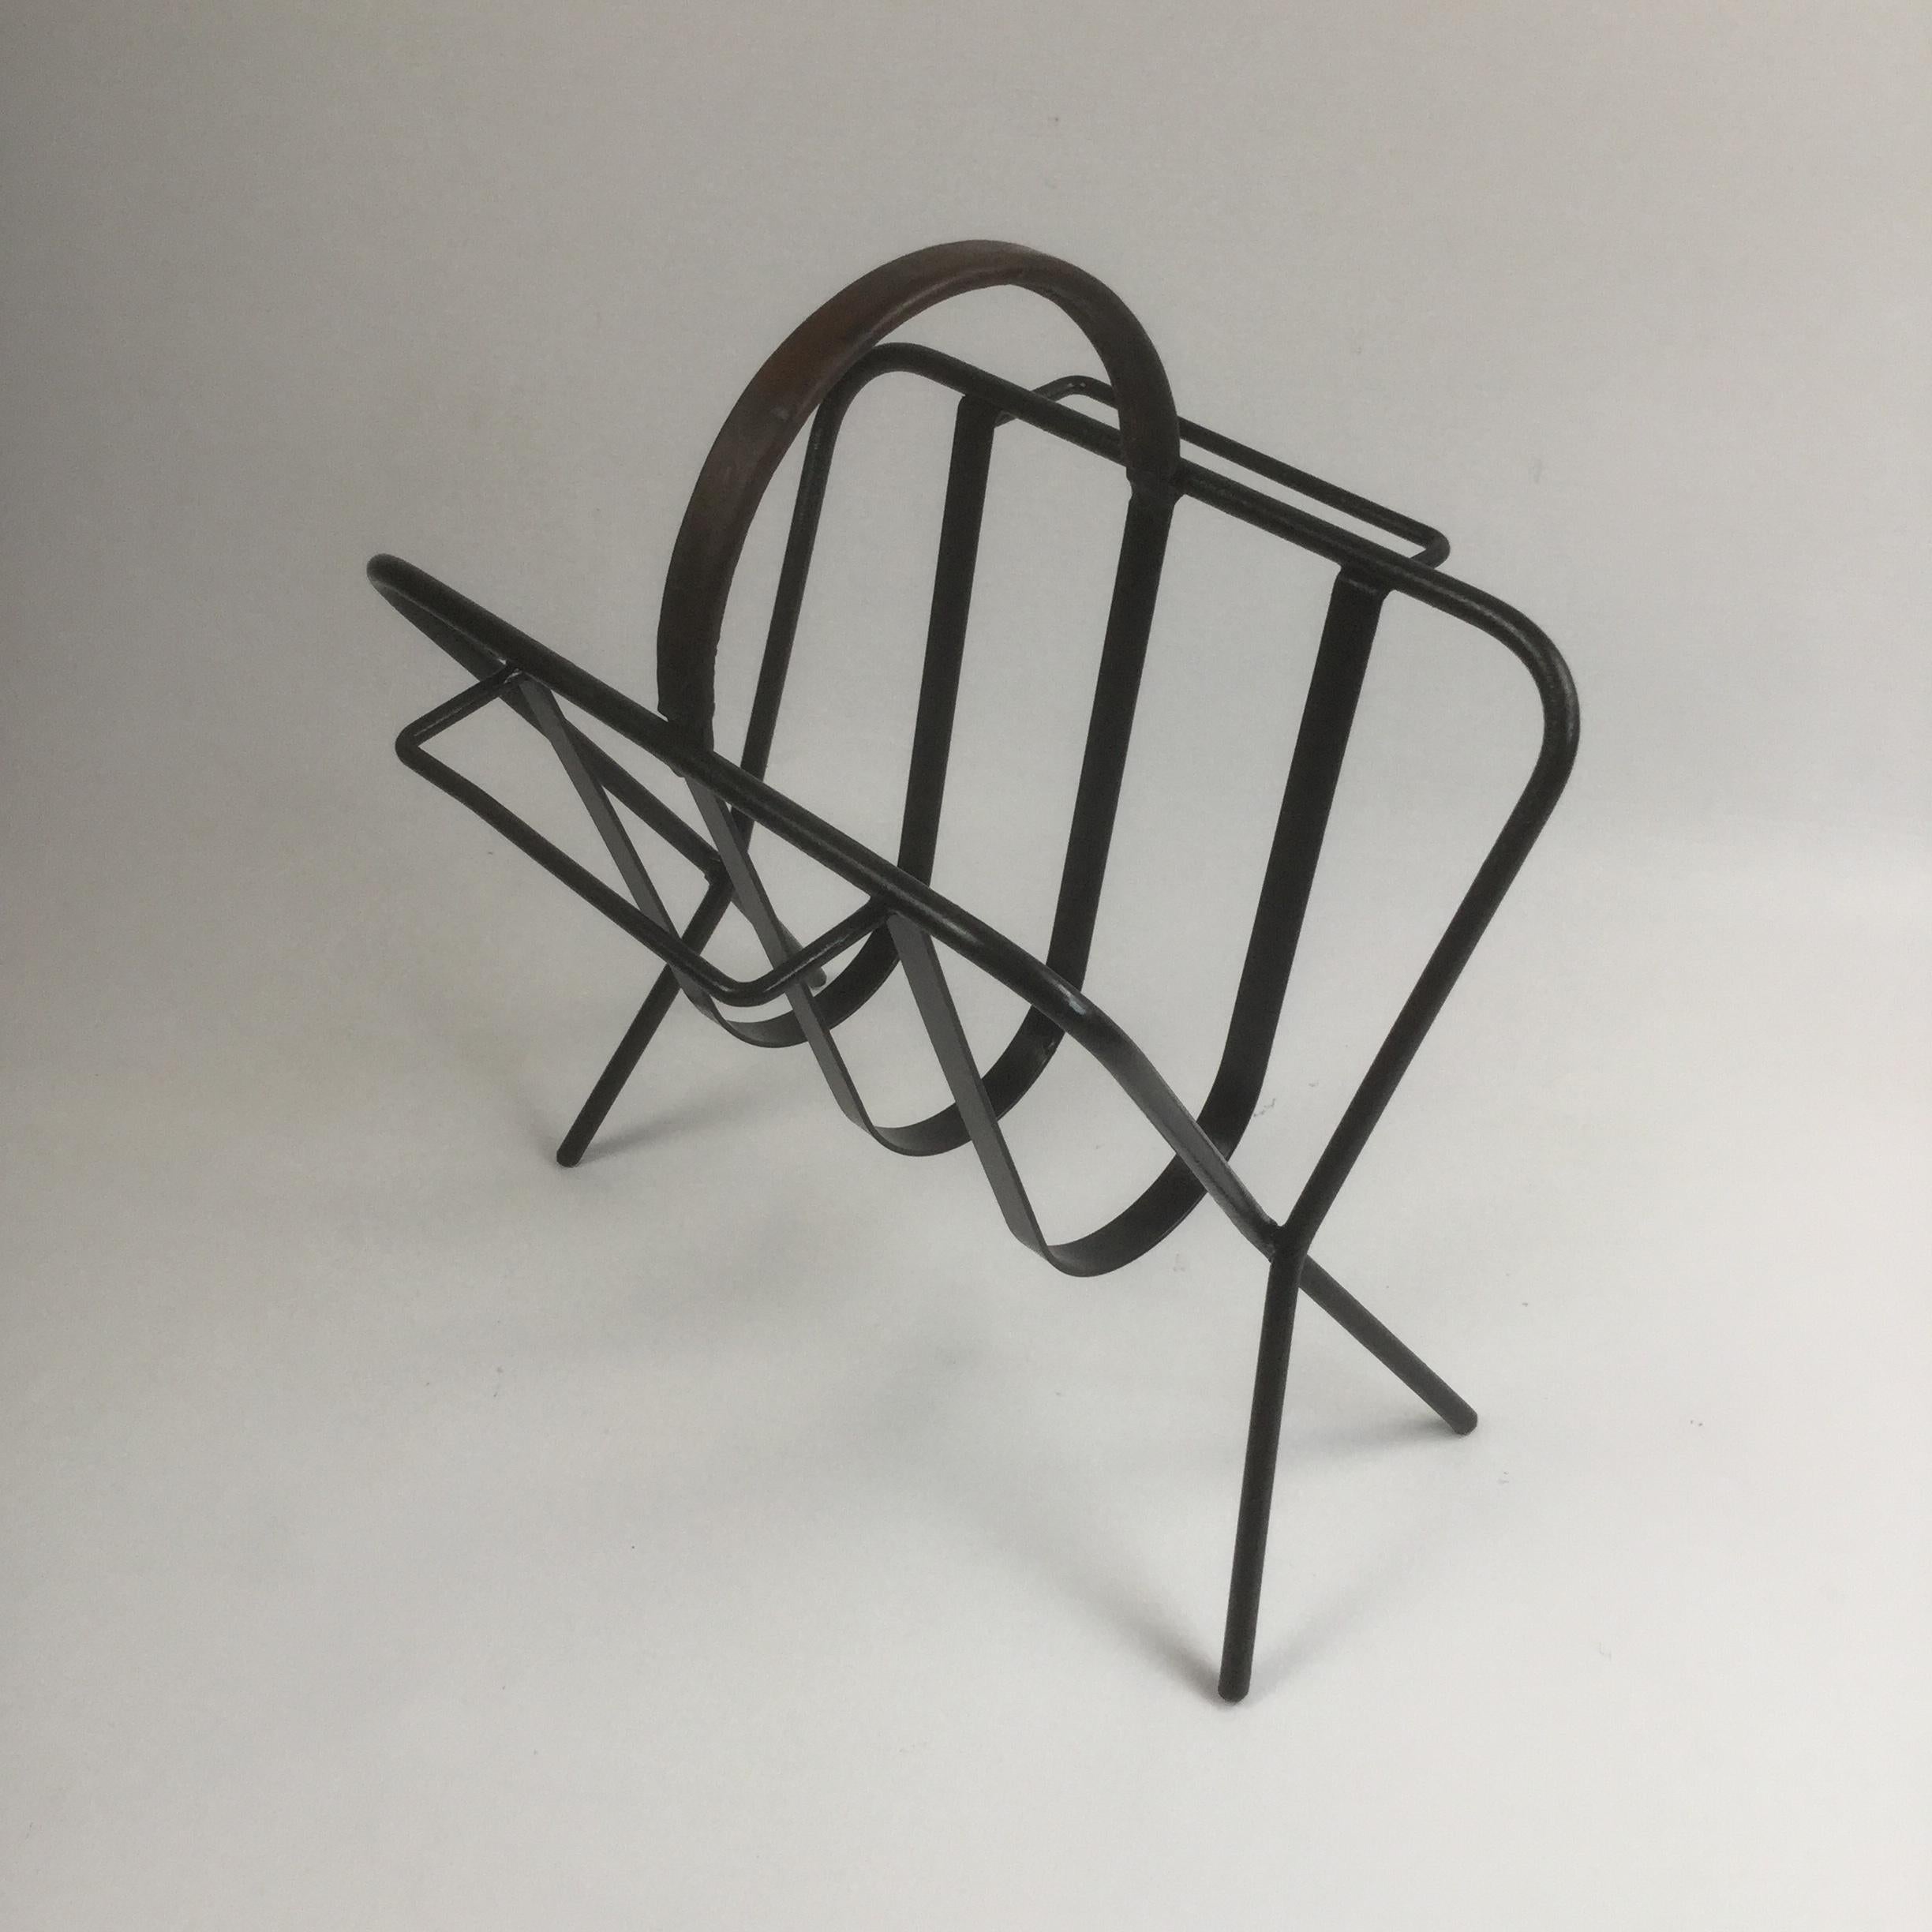 Hand-Crafted Iron and Leather Magazine Rack in a Manner of Jacques Adnet, France, 1950s For Sale